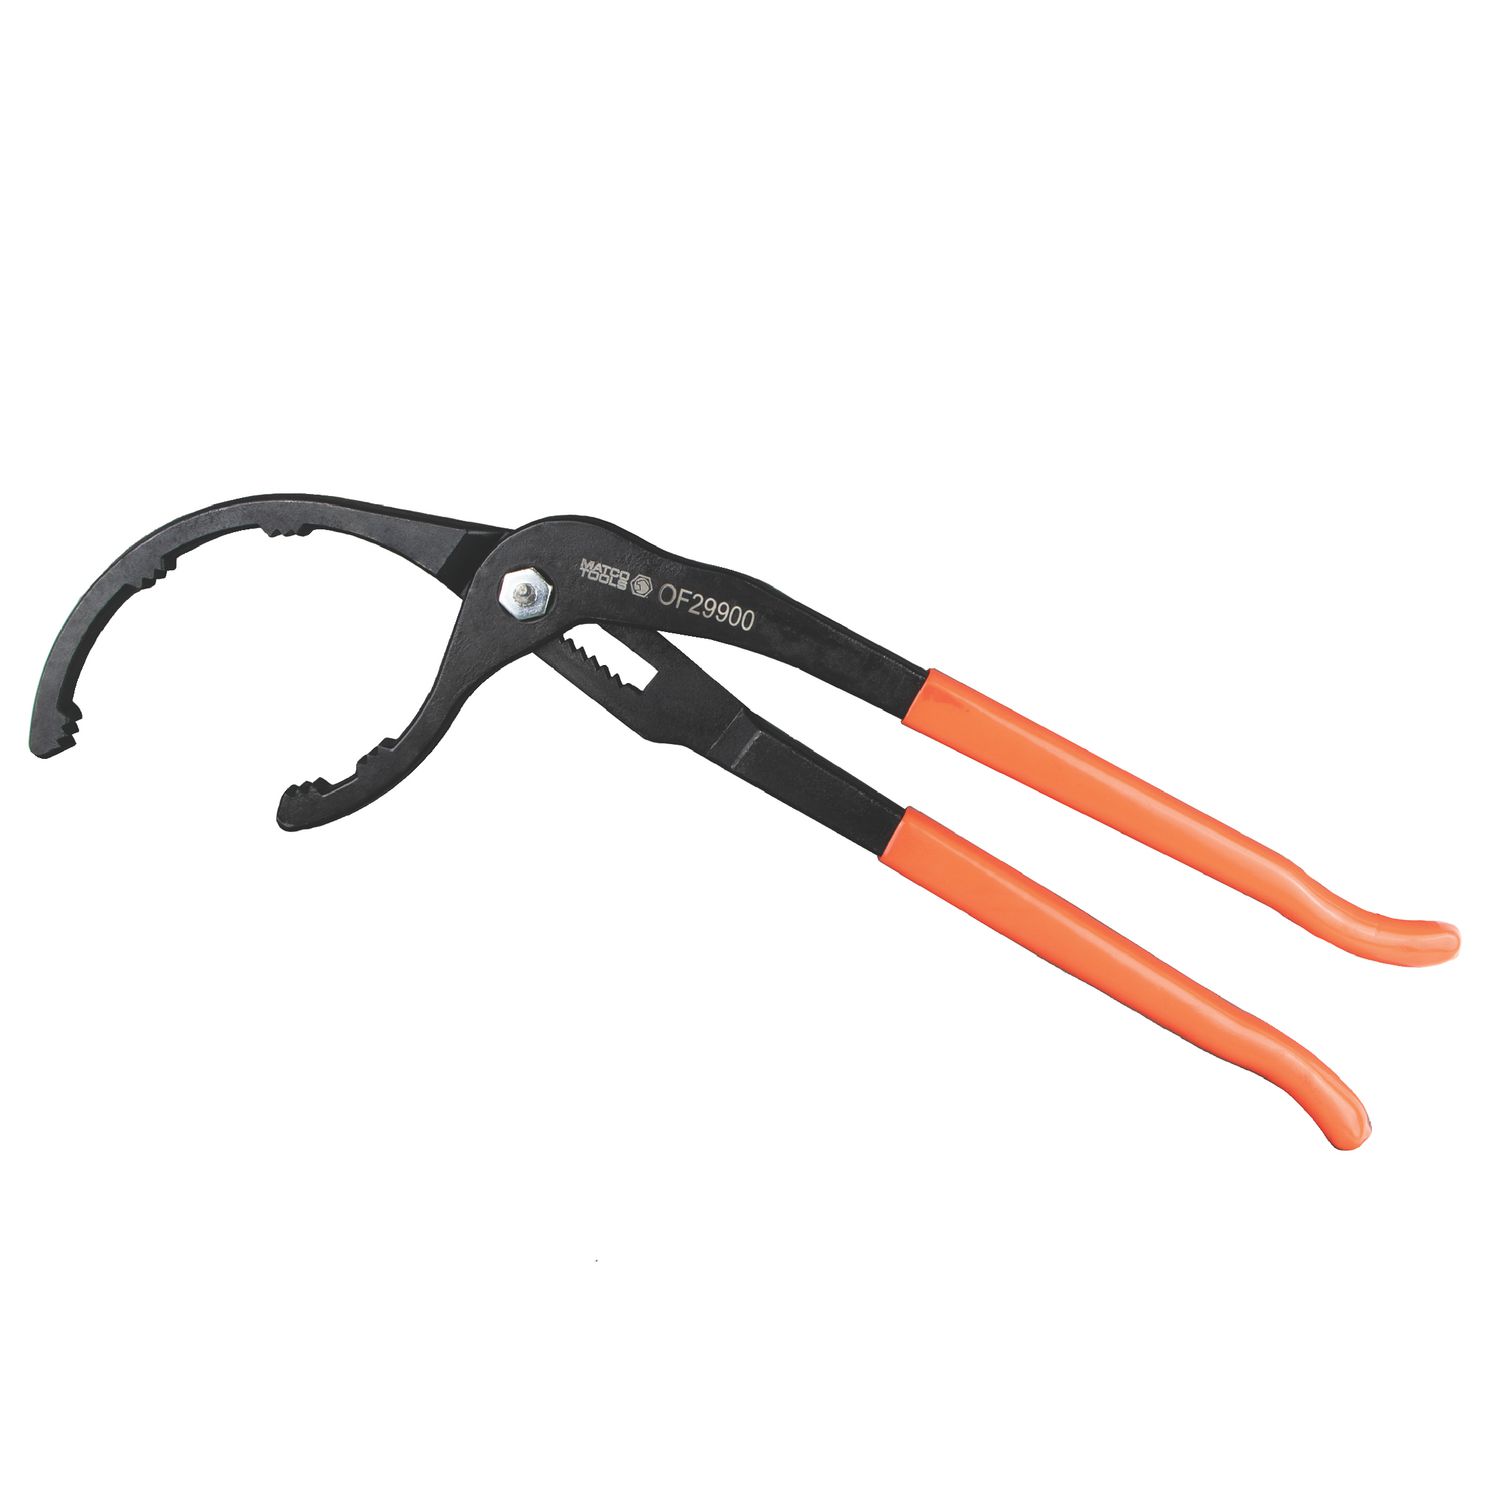 ADJUSTABLE OIL FILTER PLIERS RANGE 3 TO 7 OF29900